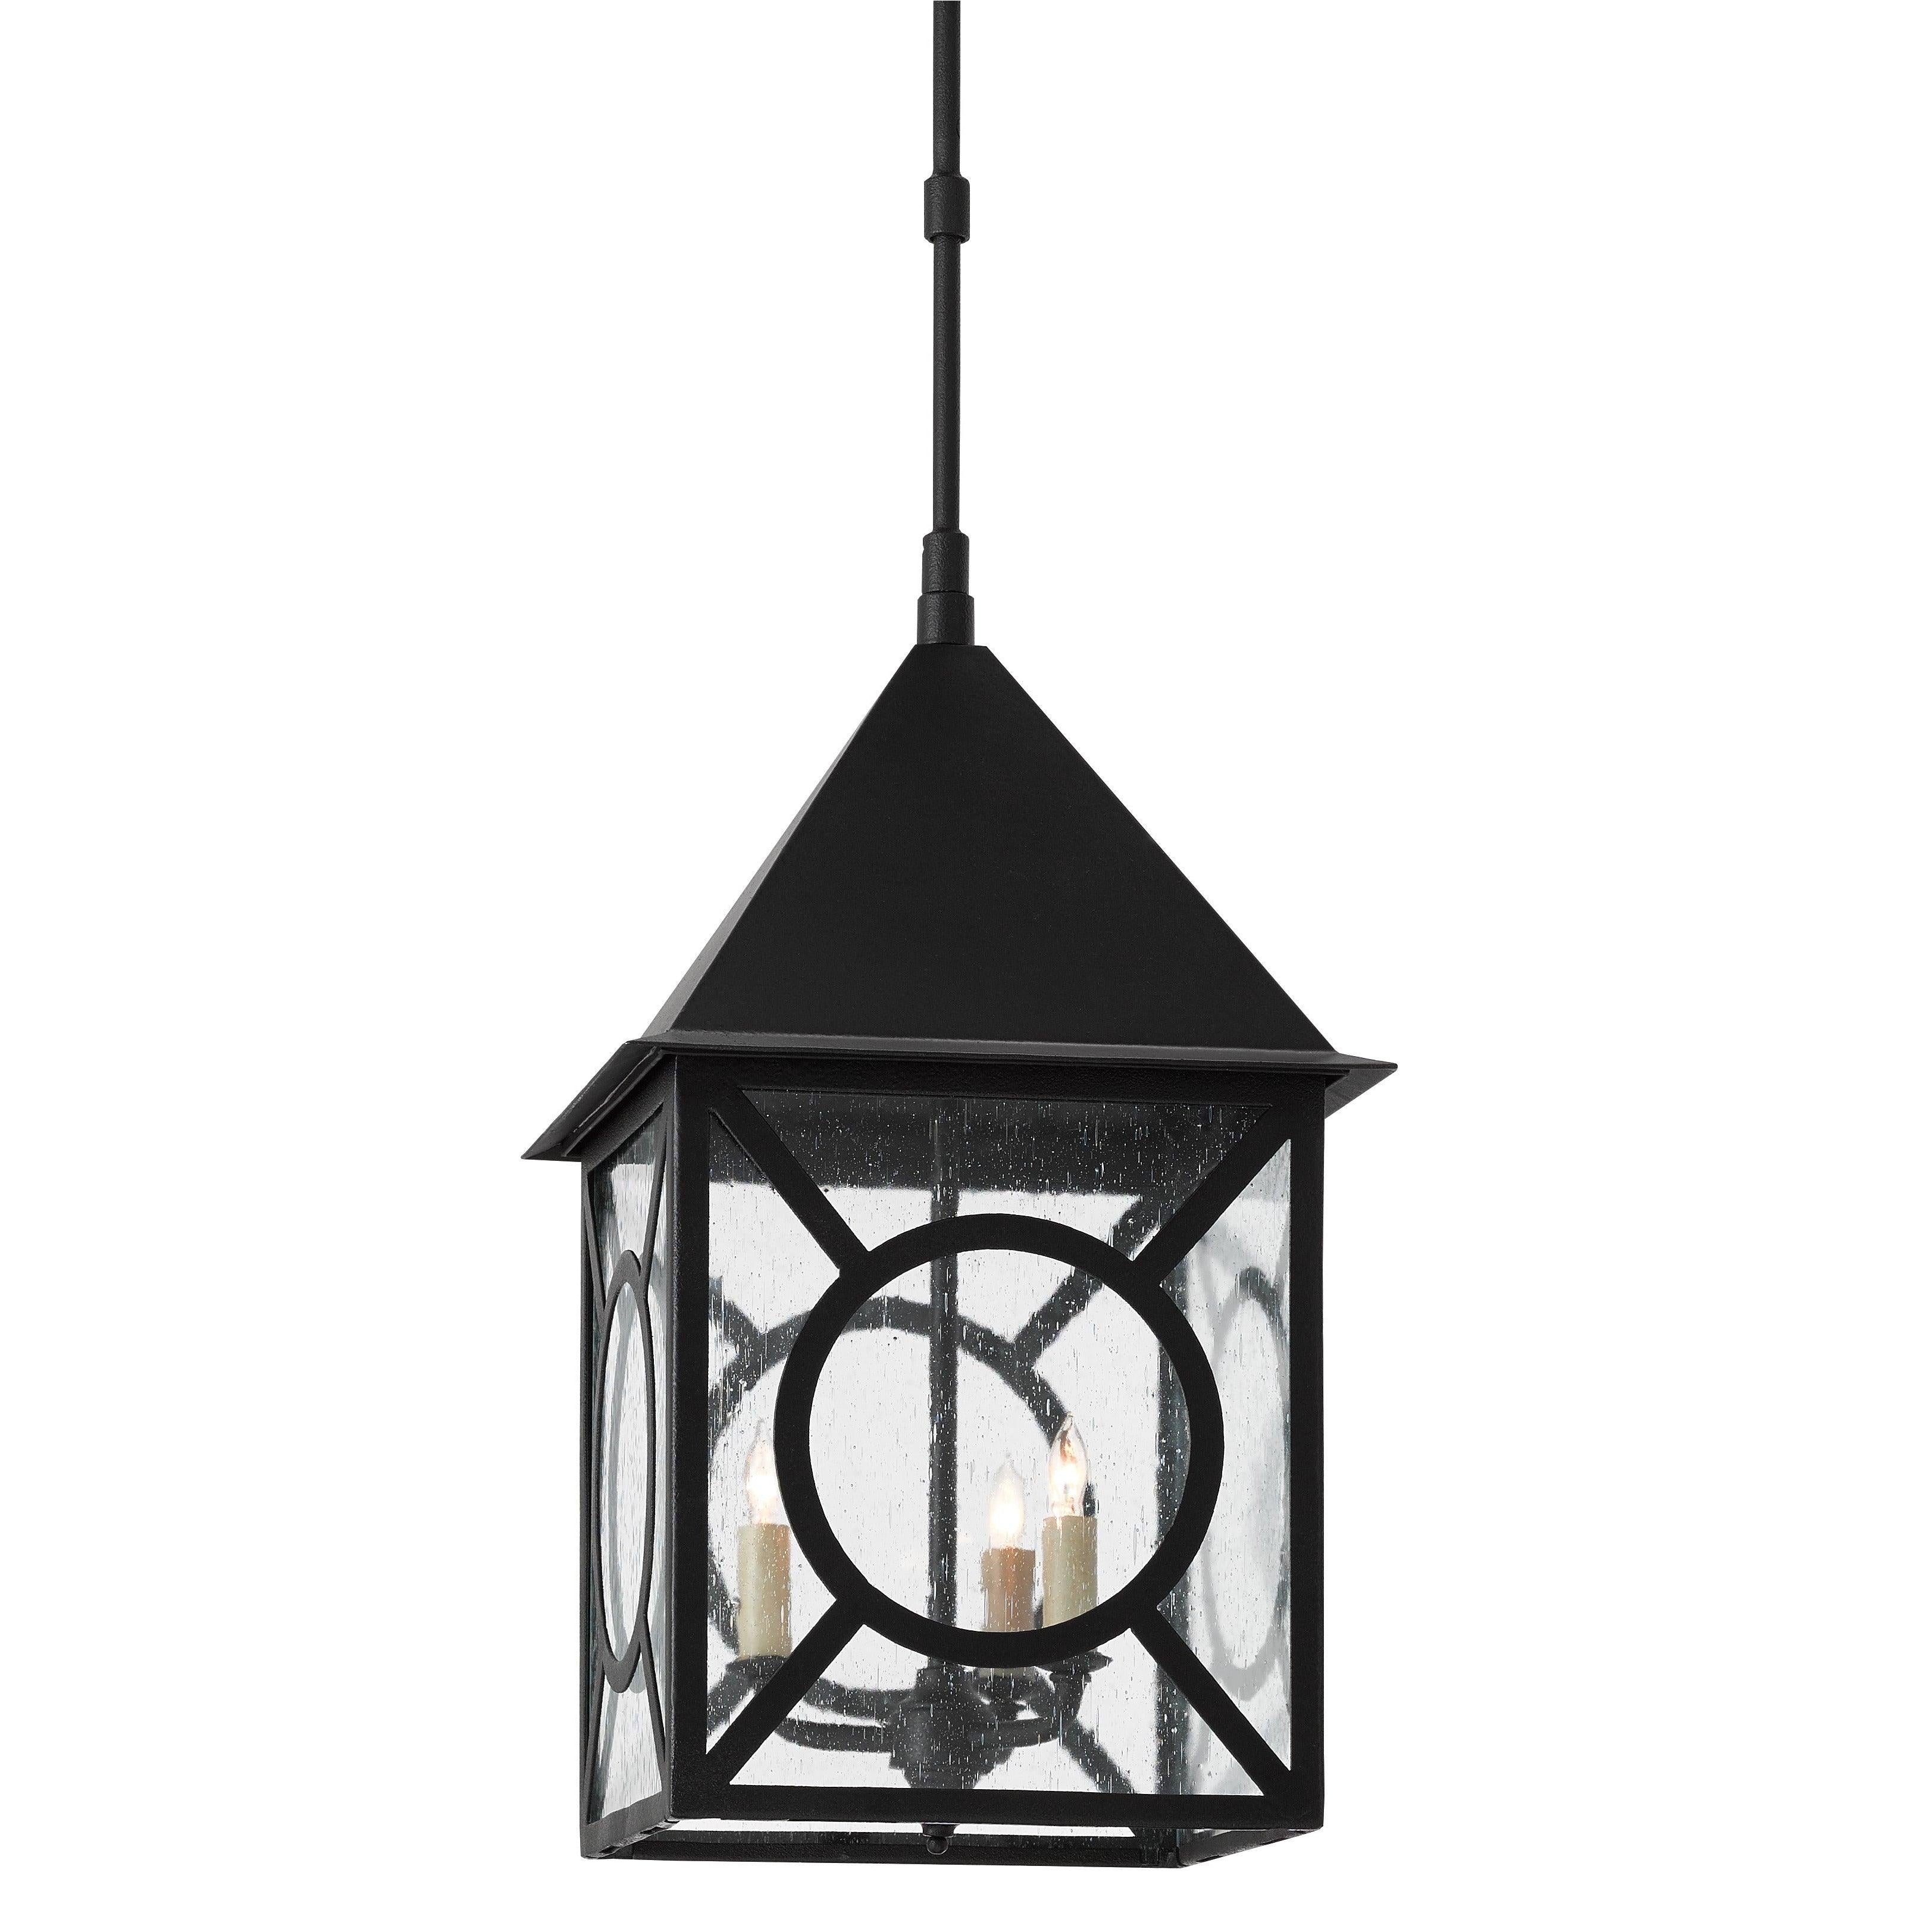 Currey and Company - Ripley Outdoor Lantern - 9500-0008 | Montreal Lighting & Hardware